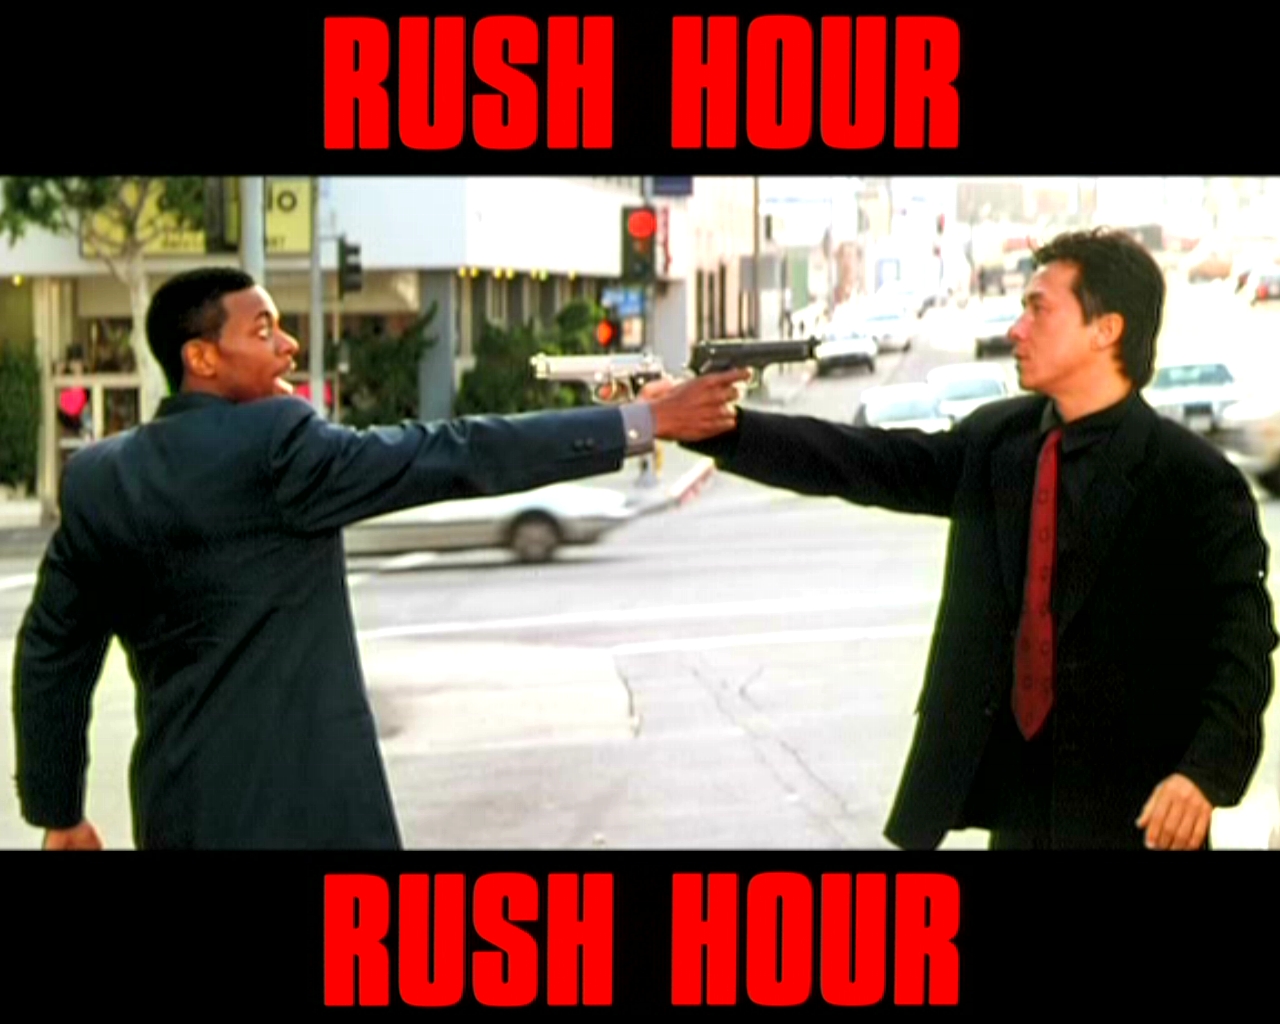 Download High quality Rush Hour wallpaper / Movies / 1280x1024